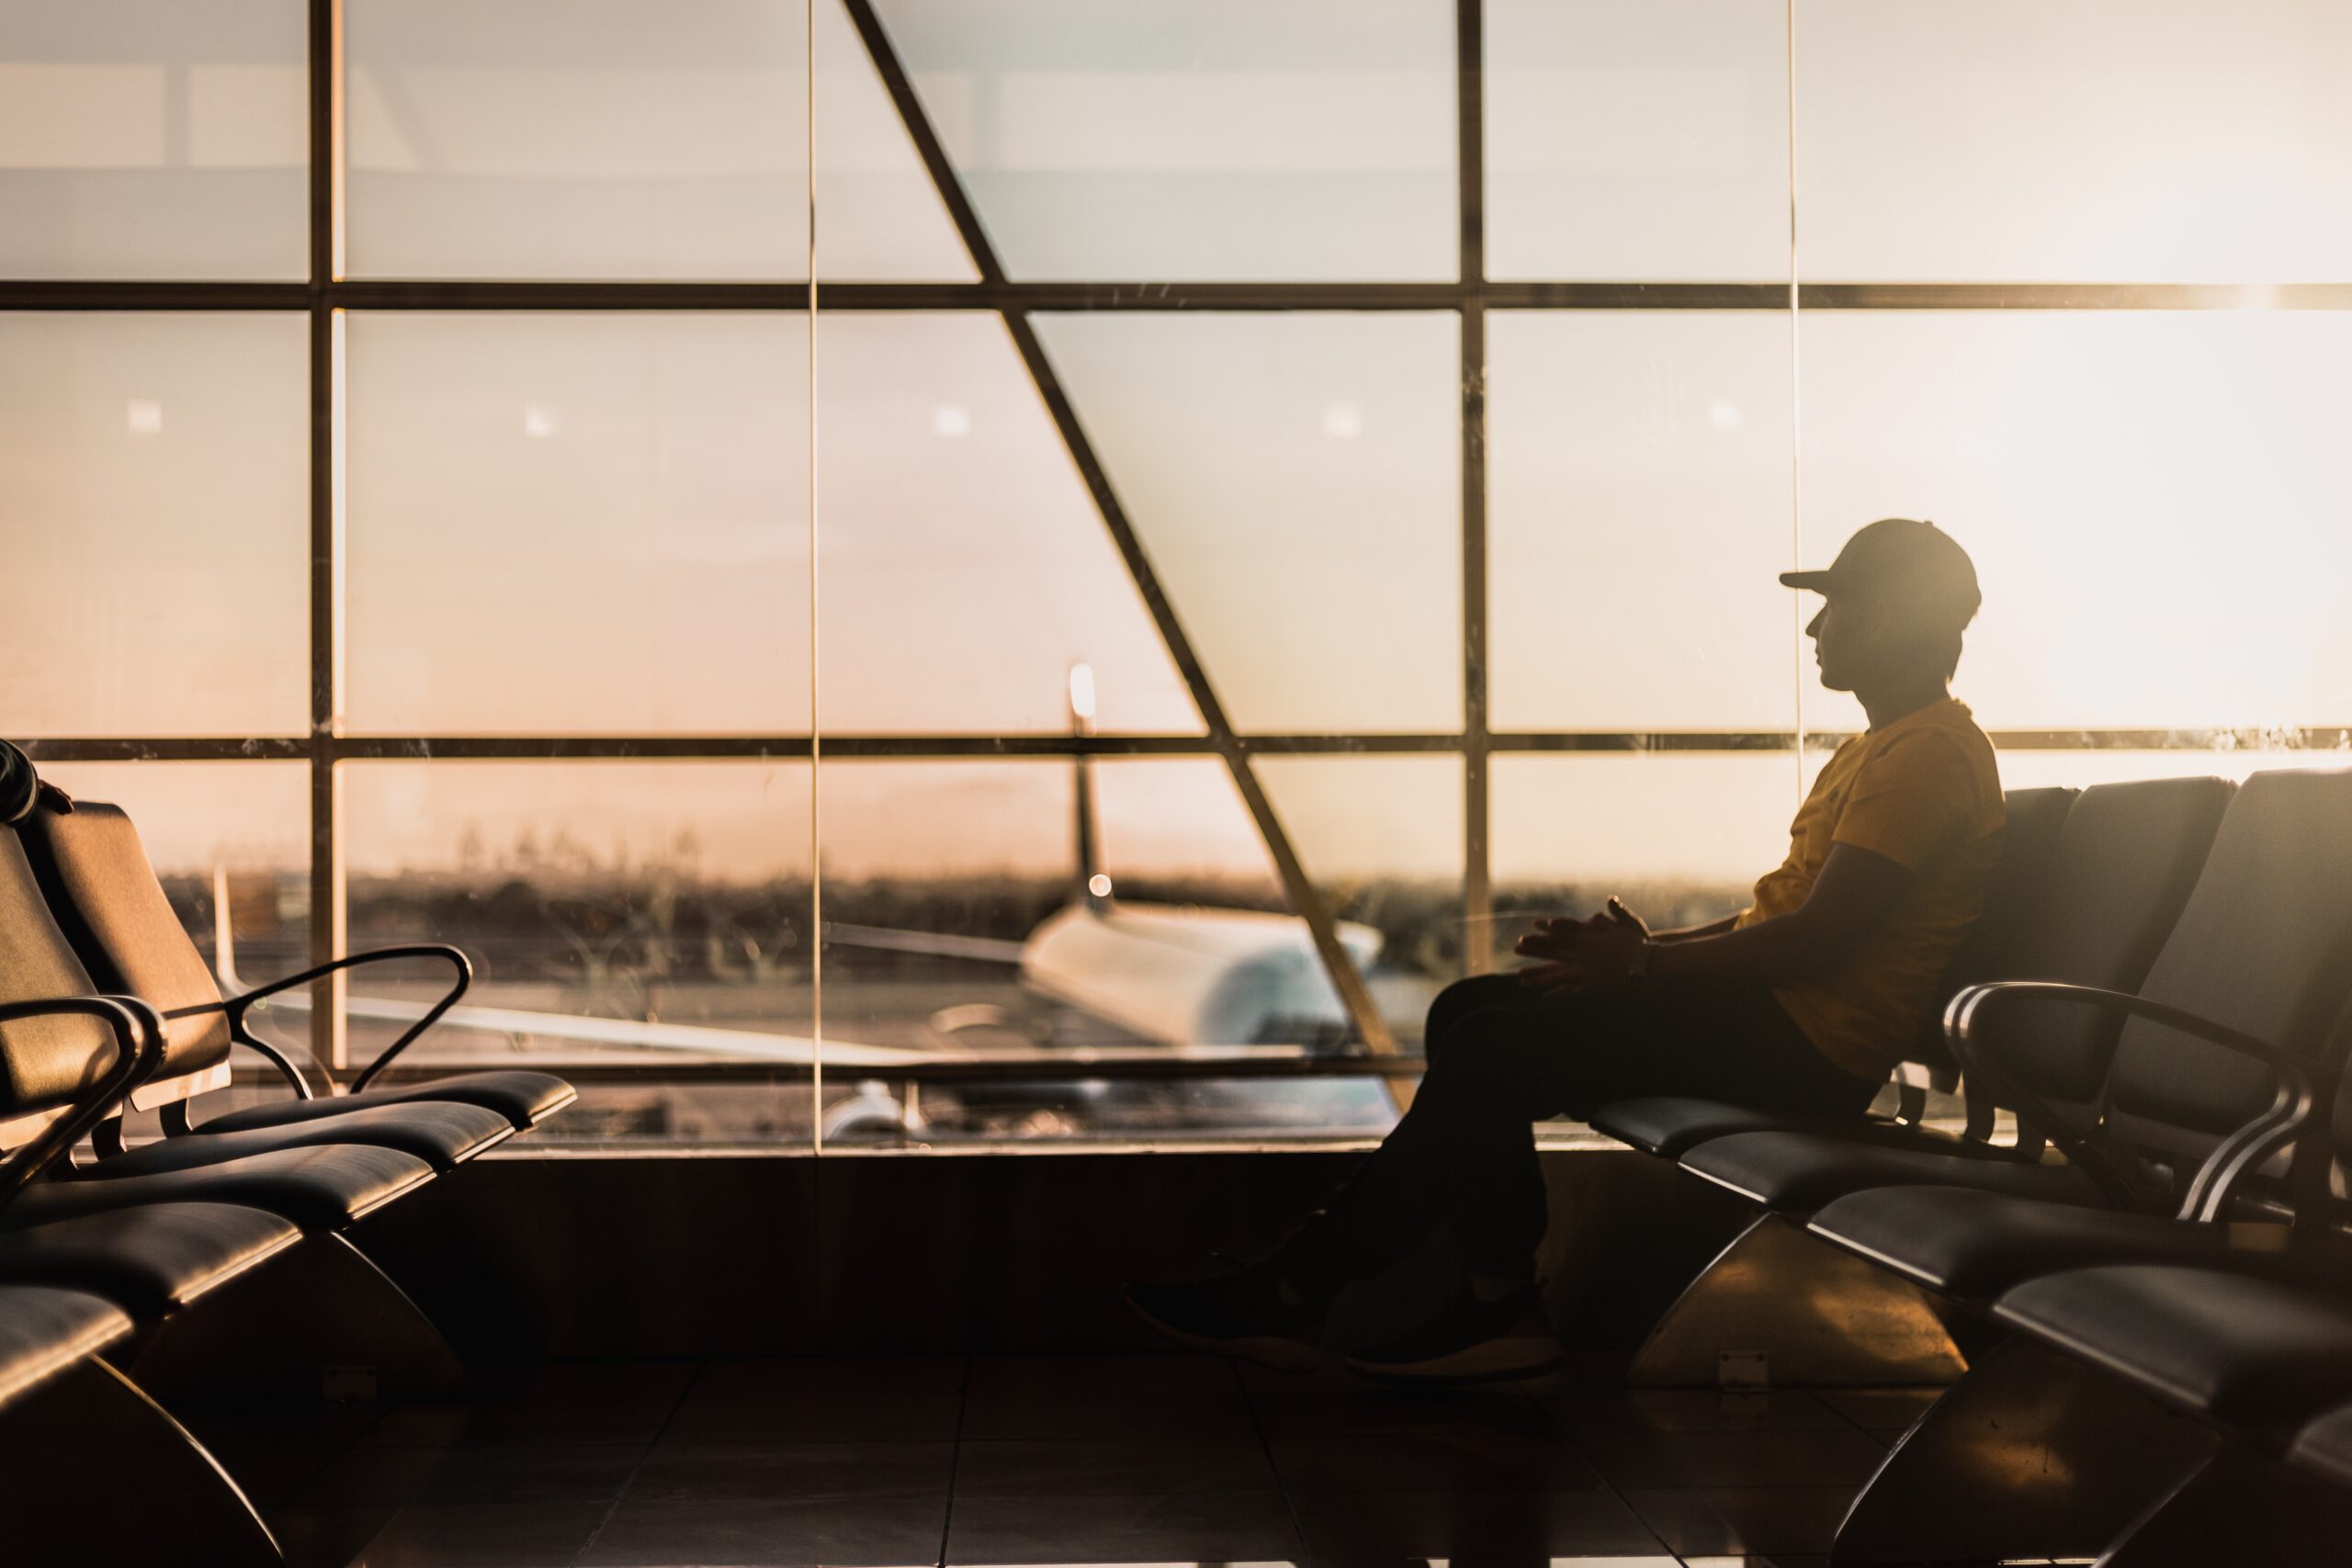 A man sits in an airport as the sun goes down